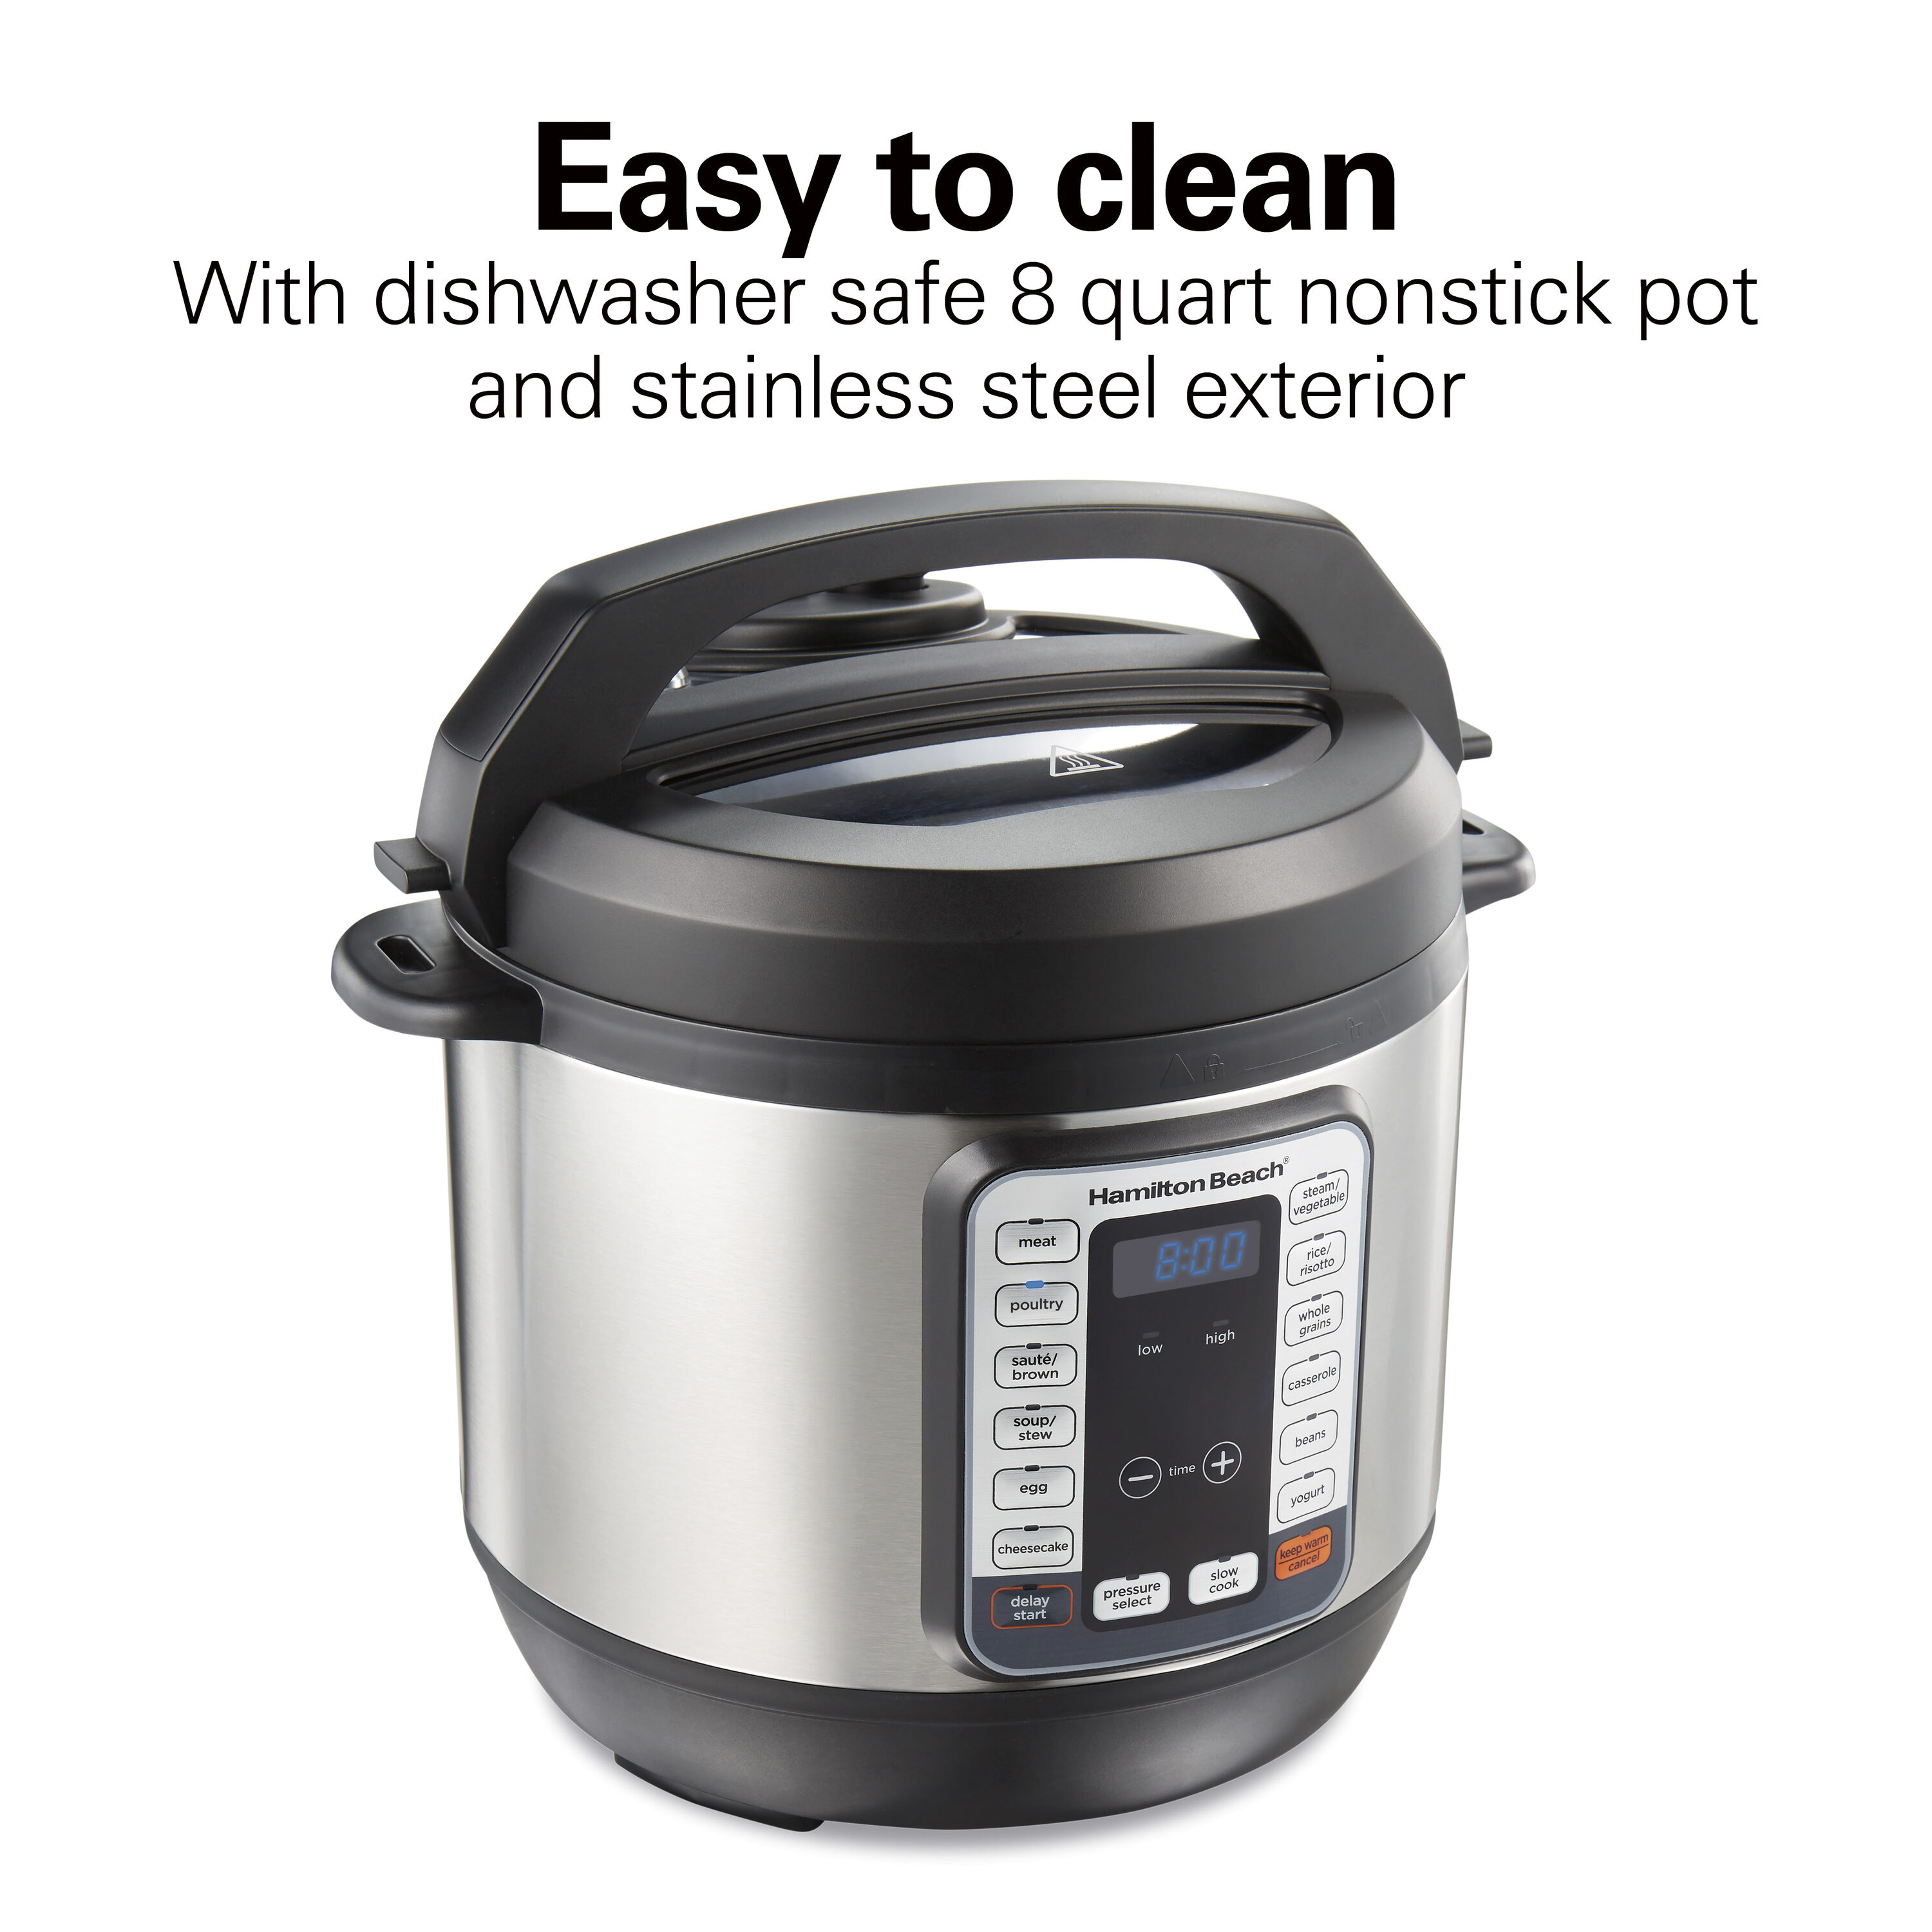 Hamilton Beach 8-Quart Stainless Steel Round Slow Cooker in the